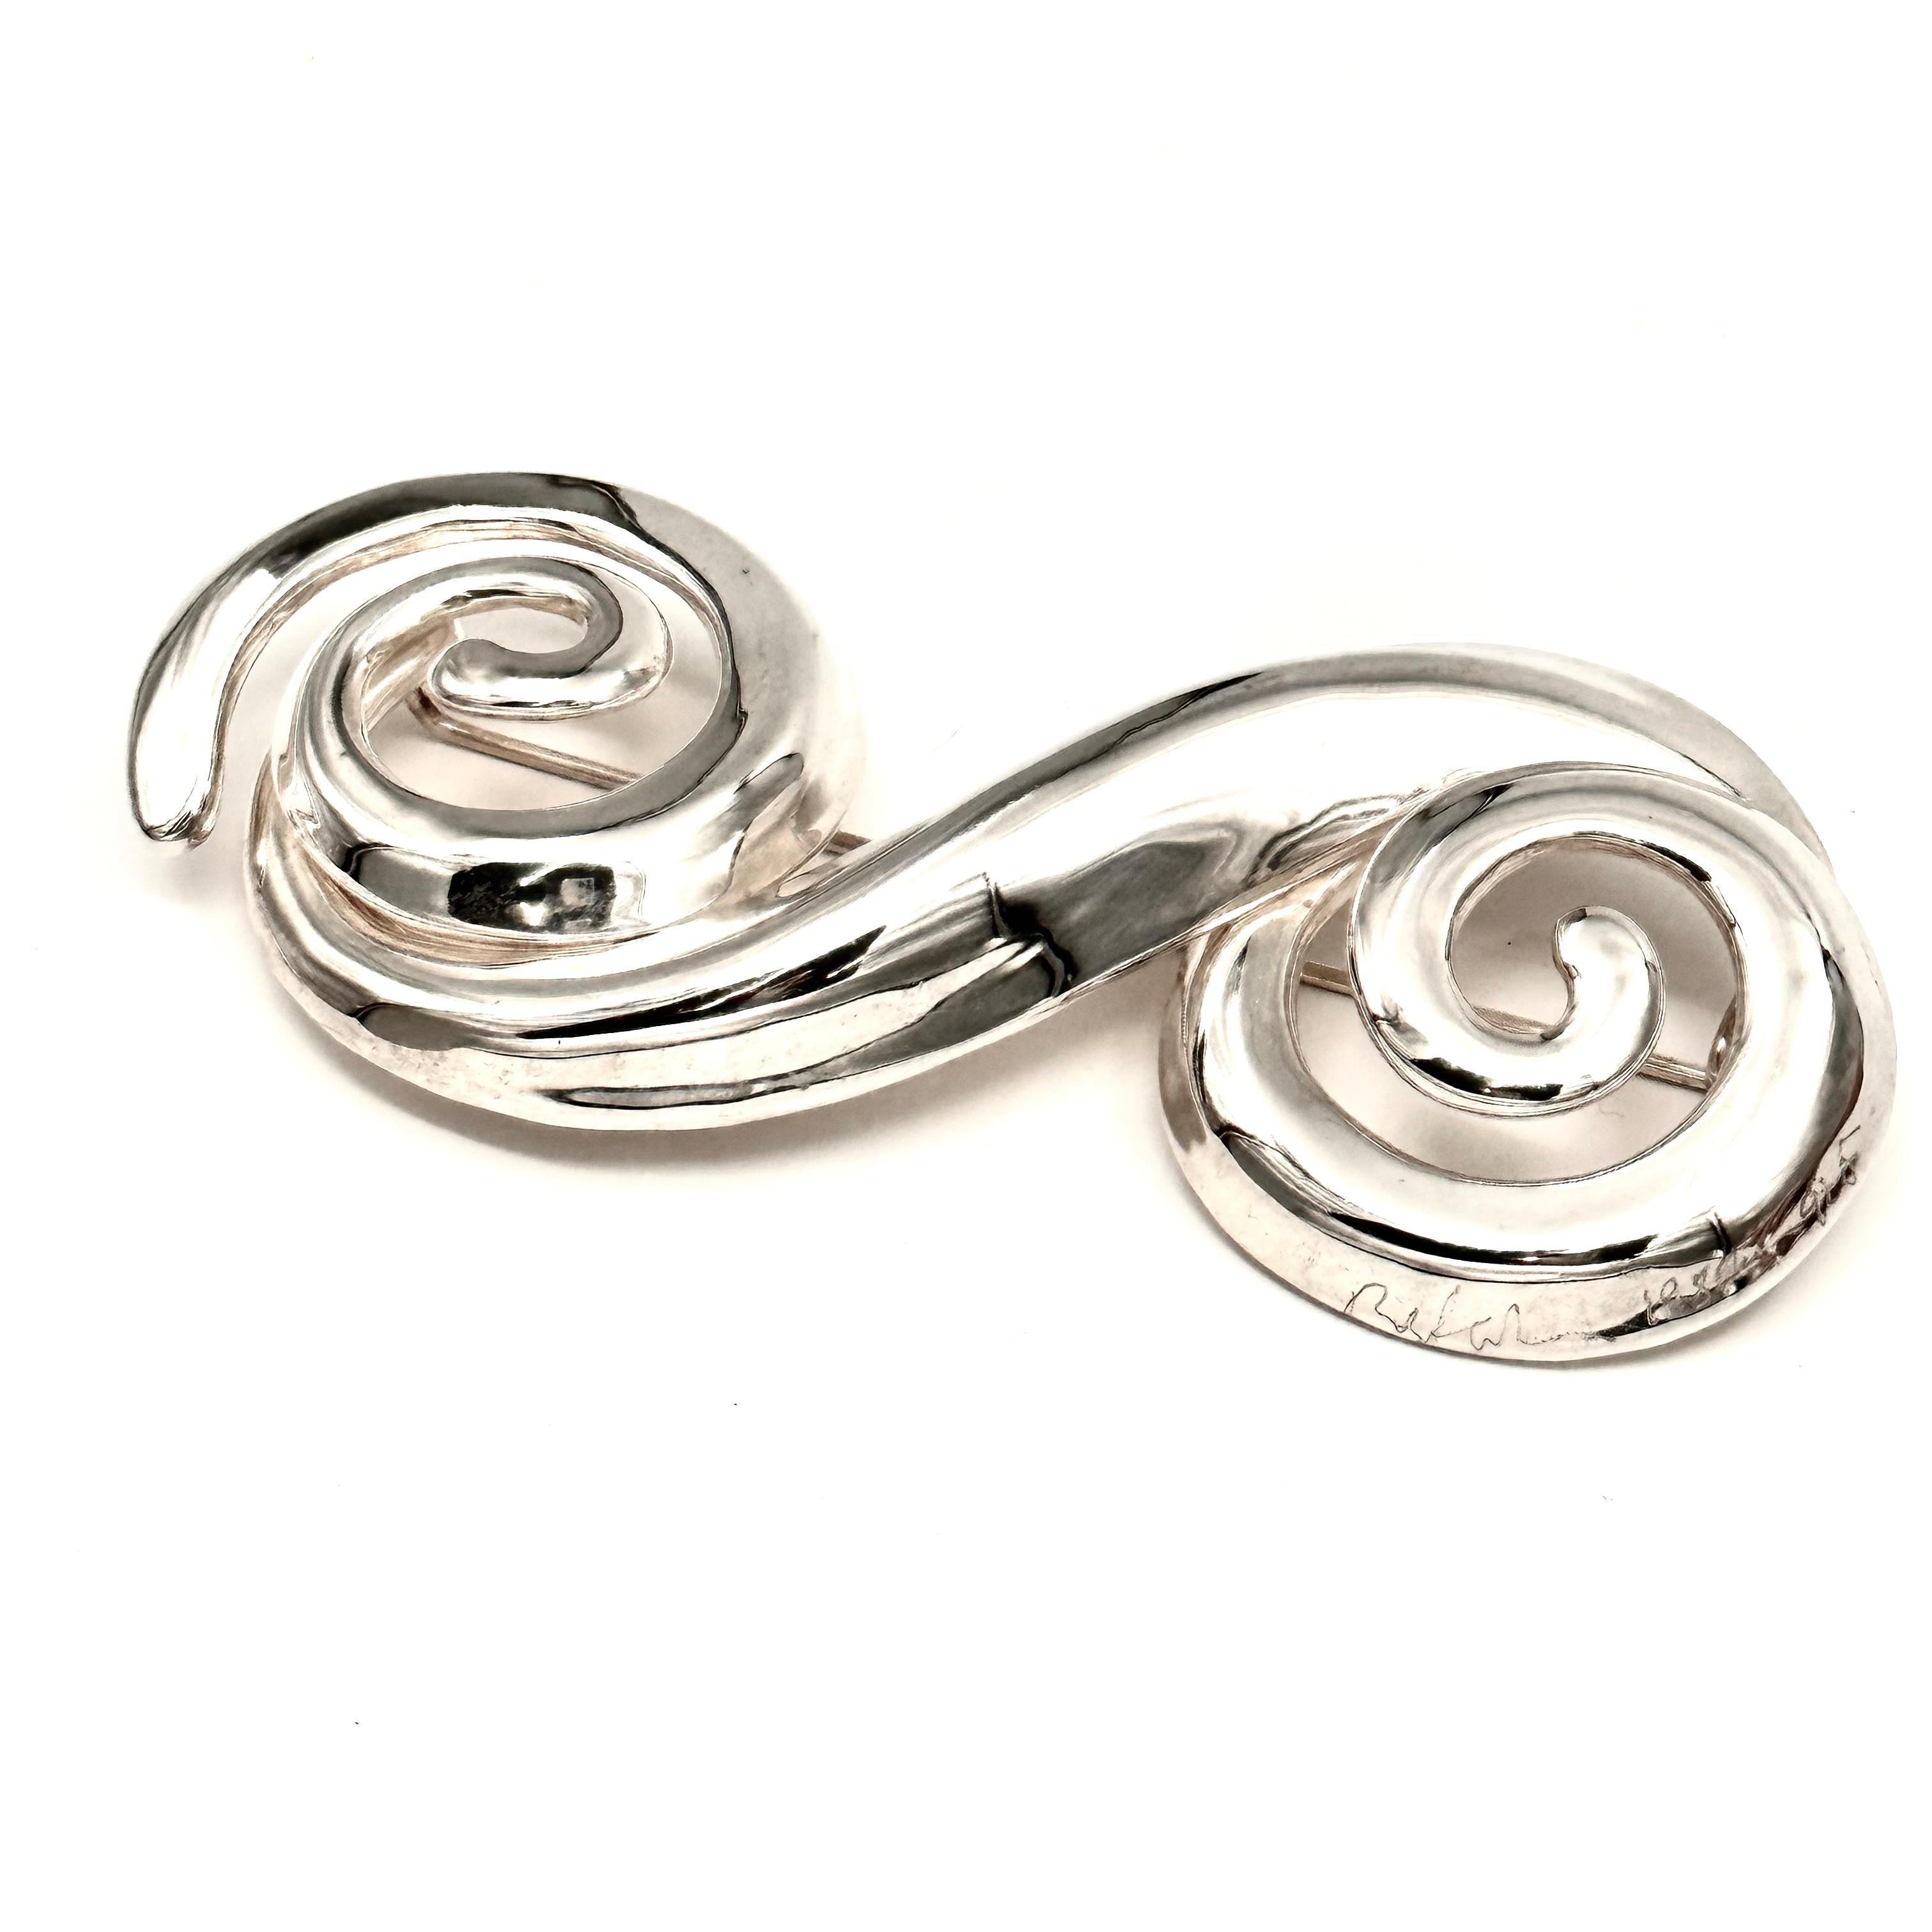 What a fun and dramatic piece this one is! Very large and important, a true statement of glamour and high fashion, this brooch is composed of two spirals that are joined by a sweeping curvilinear form, very dimensional and sculptural. Big scale was